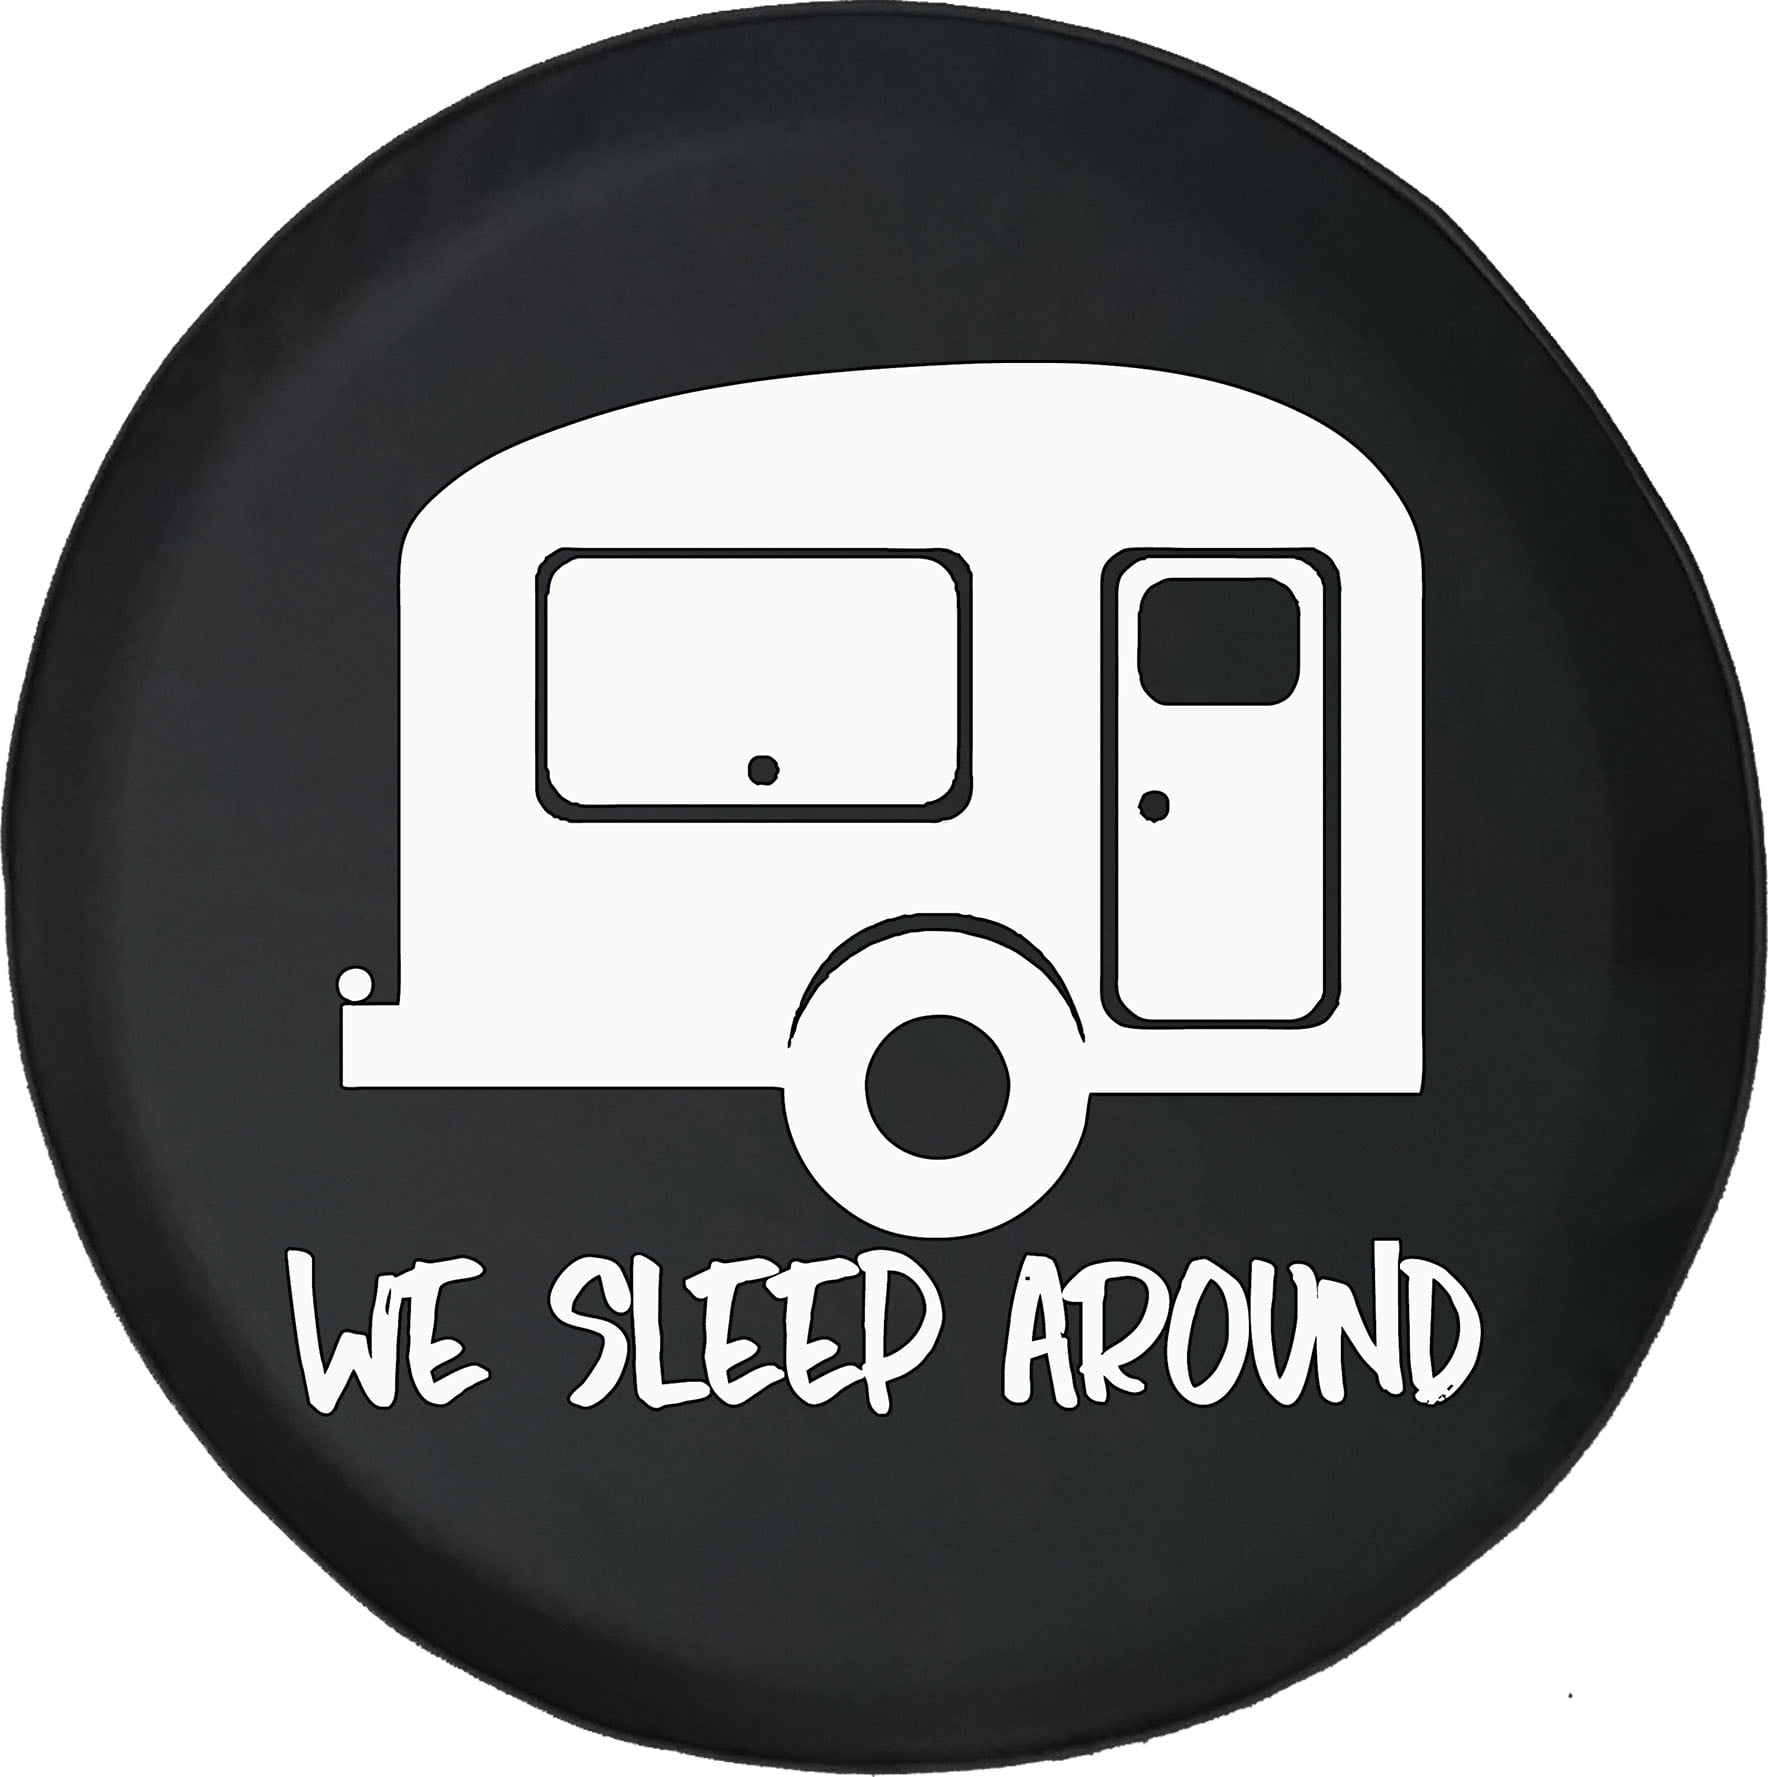 Black Tire Covers Tire Accessories for Campers, SUVs, Trailers, Trucks,  RVs and More Funny We Sleep Around Camper Black 30 Inch